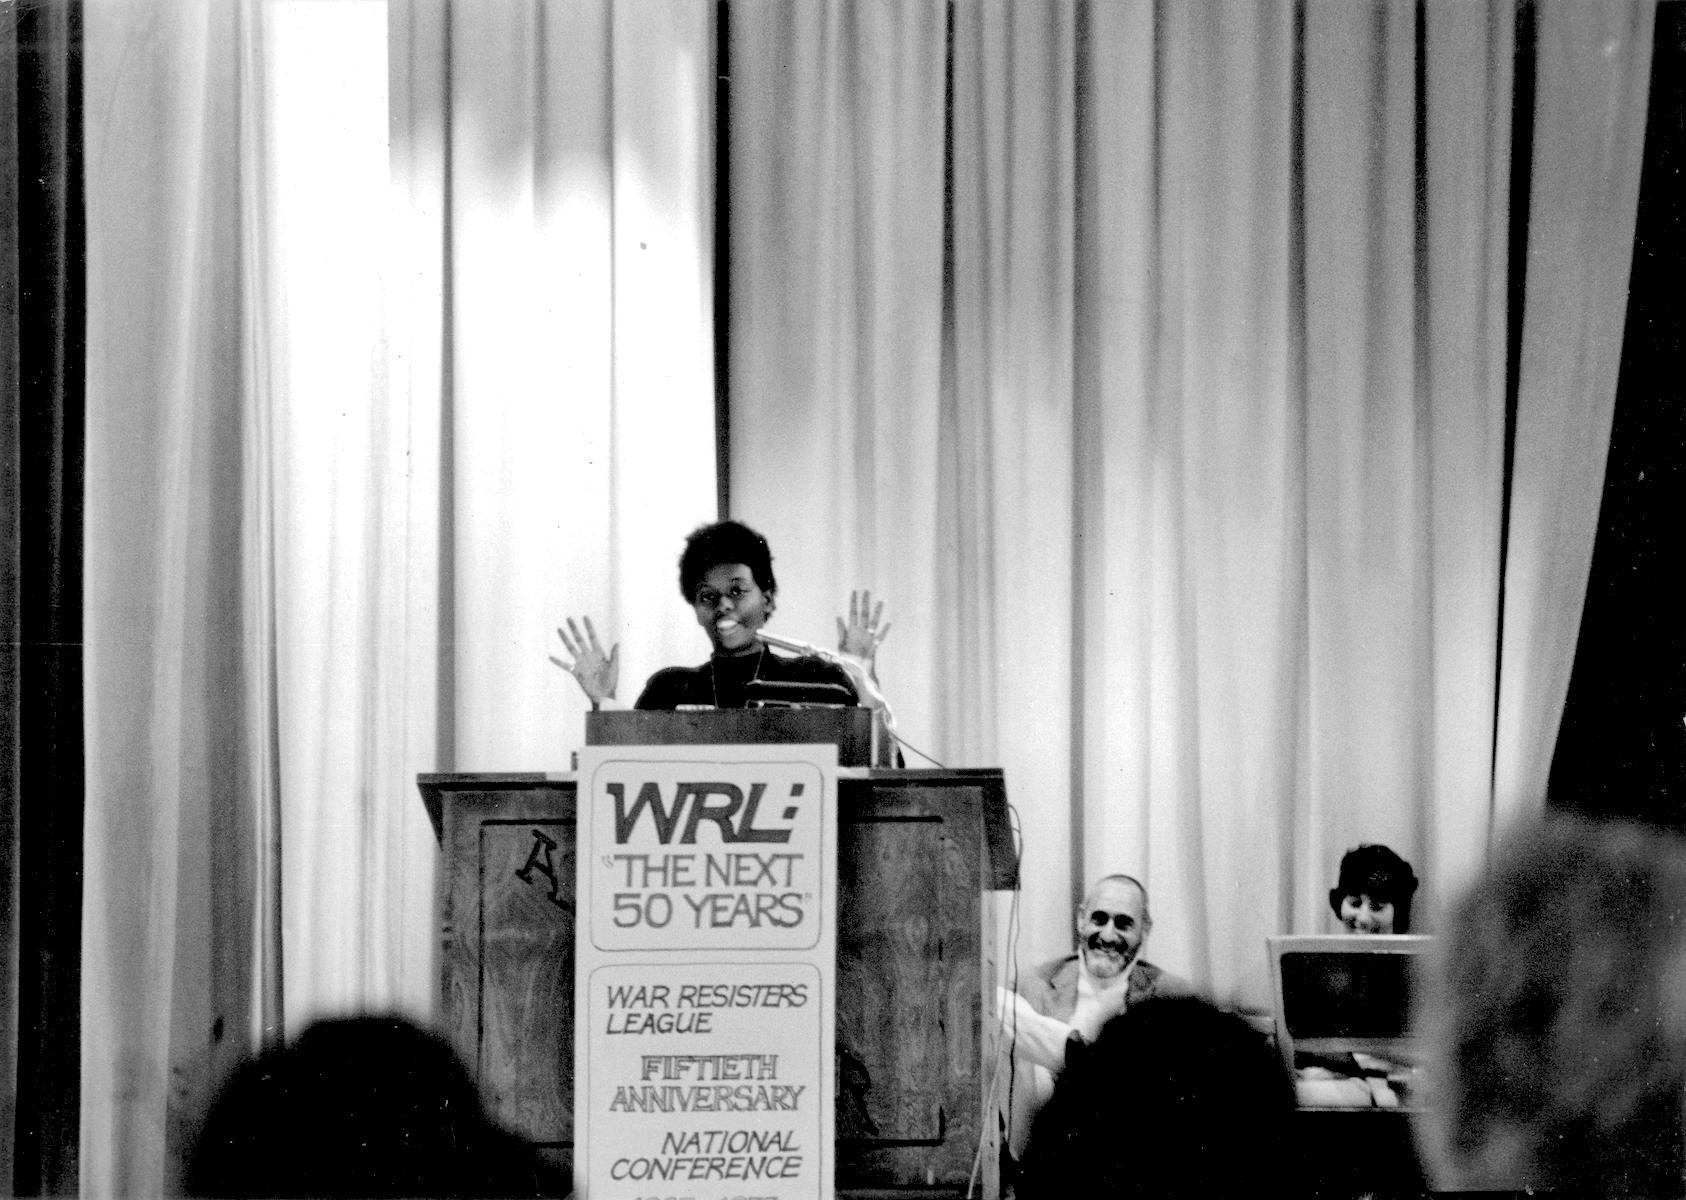 Mandy at the WRL Anniversary Conference podium with Ira Sandperl and Irma Zigas in the background on right; August 7, 1973; Asilomar Conference Center, Pacific Grove, CA. Photo Credit: Nancy Purser. Mandy shares, “I joined the staff of the War Resisters League’s Western Regional Office in San Francisco in 1969. It was my first-ever paying job. I was one of the conference coordinators.” Photo courtesy of Mandy Carter.